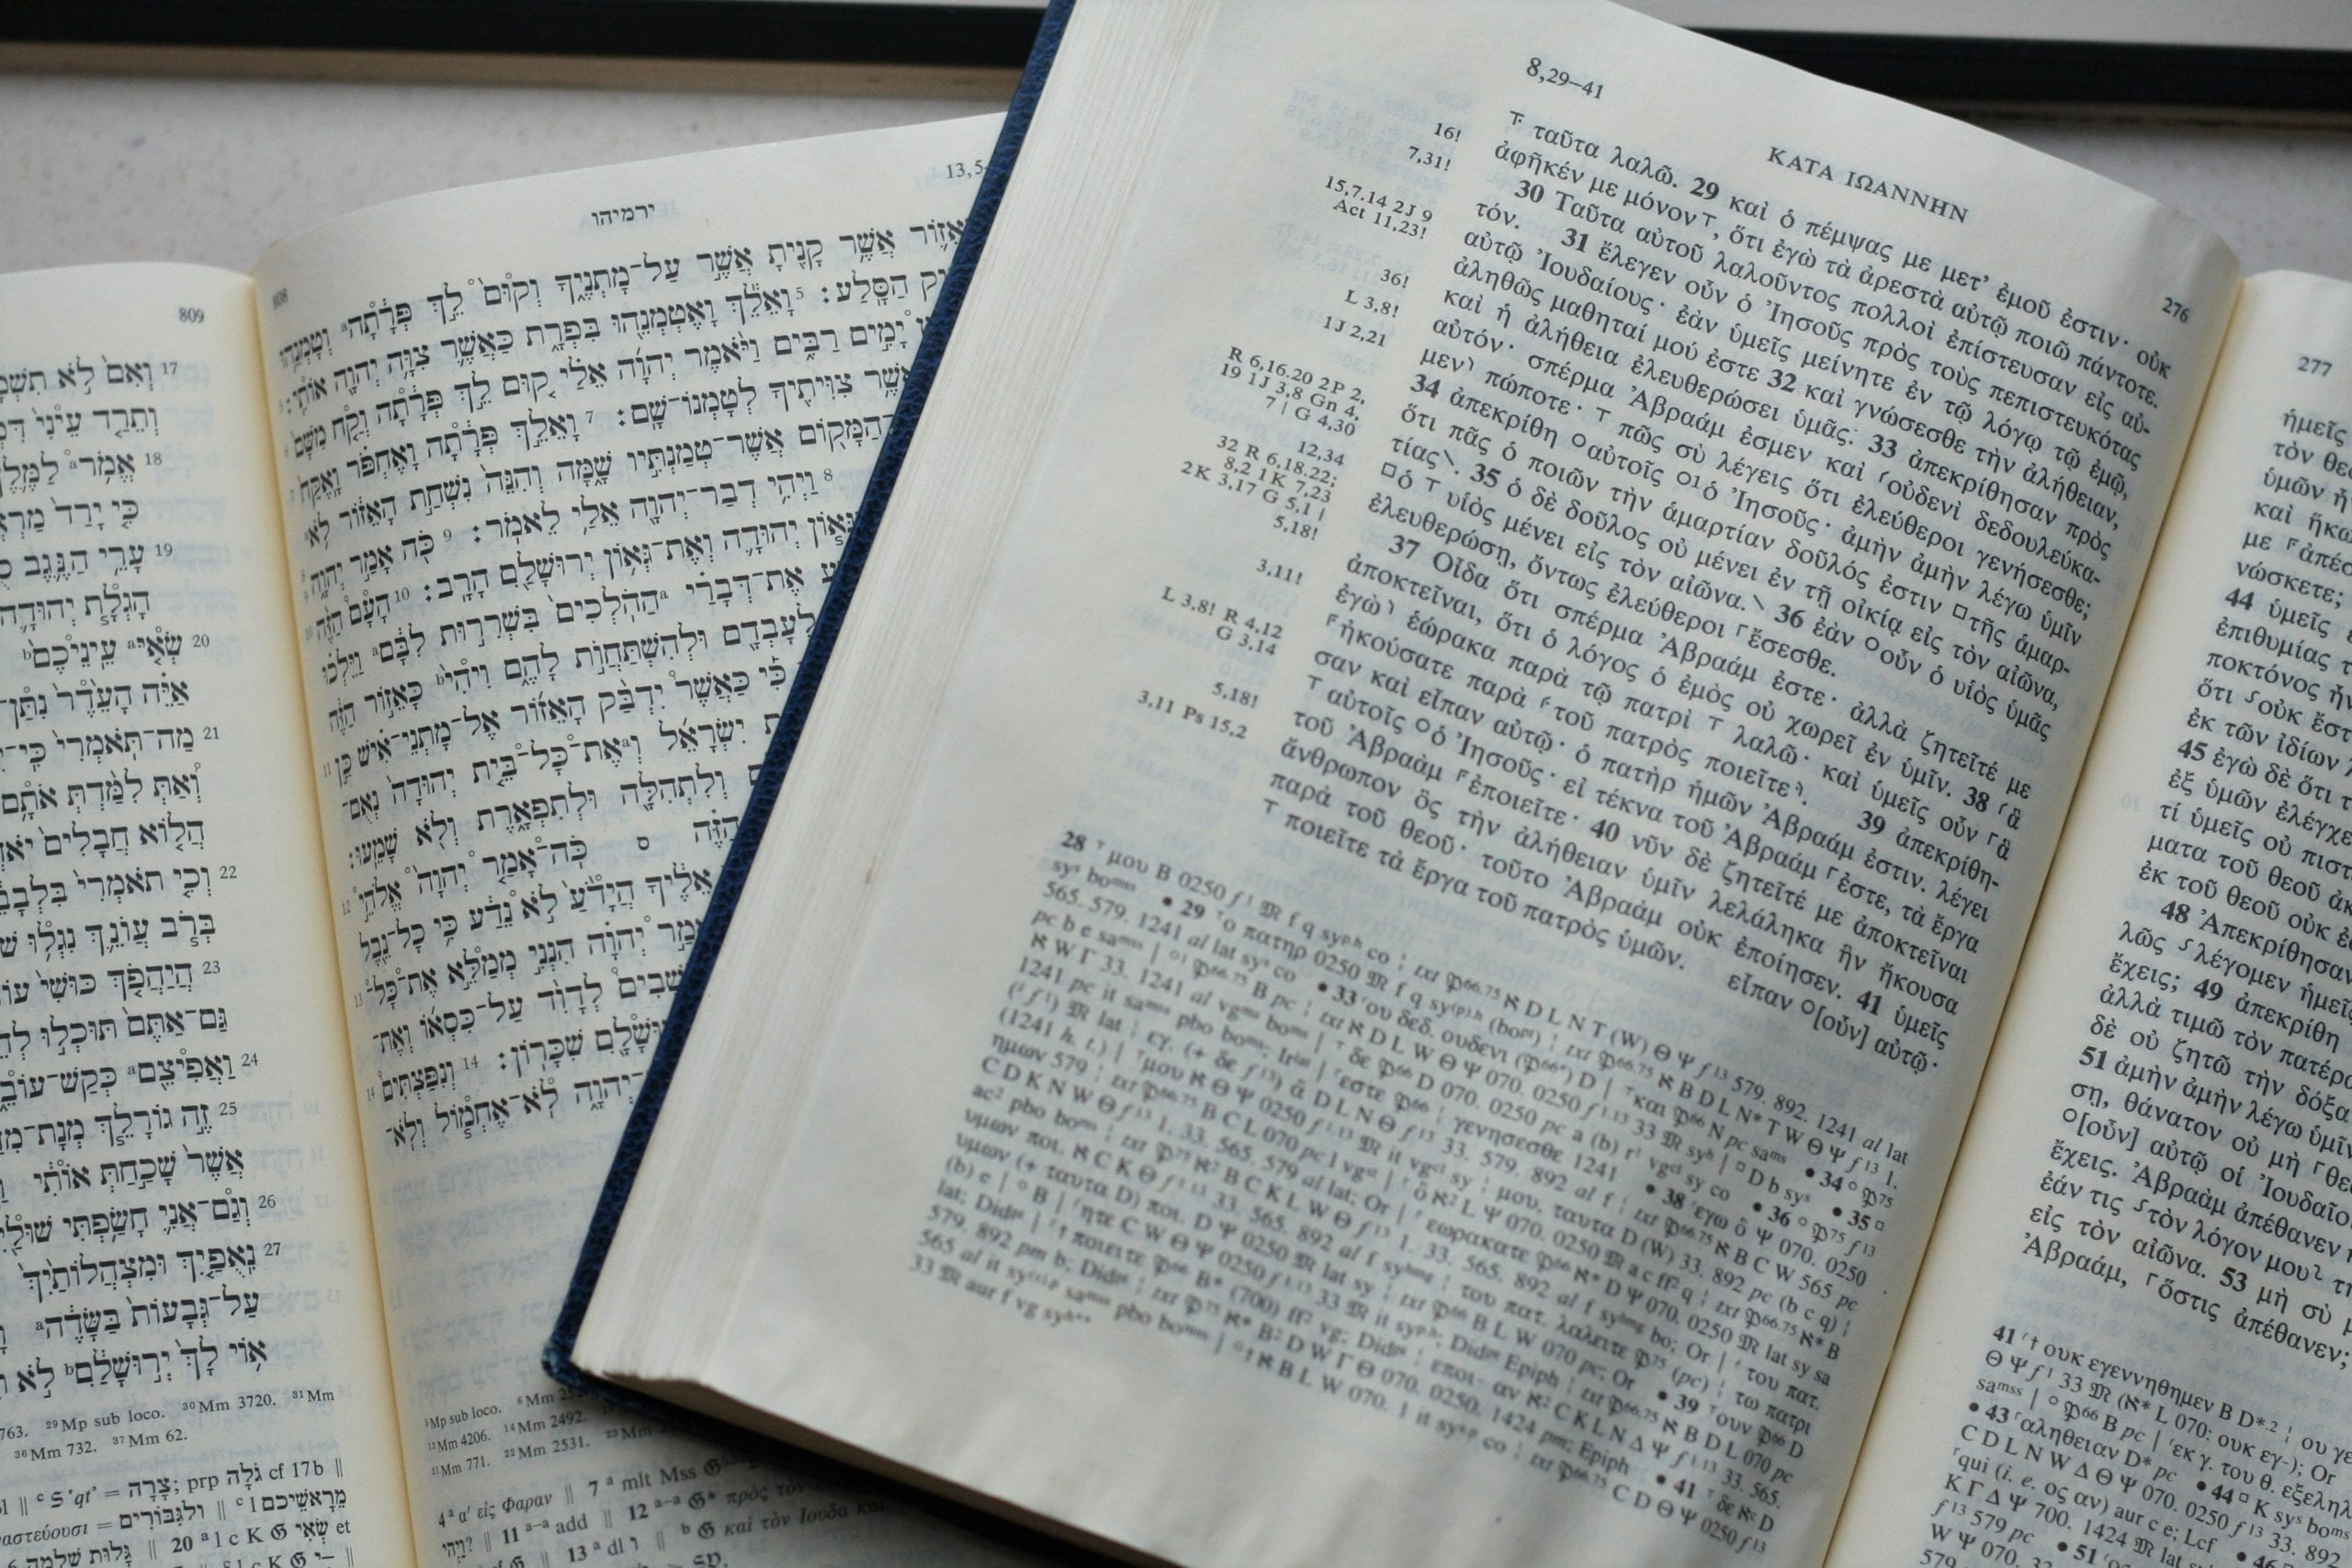 Episode 10: The Jewishness of the New Testament